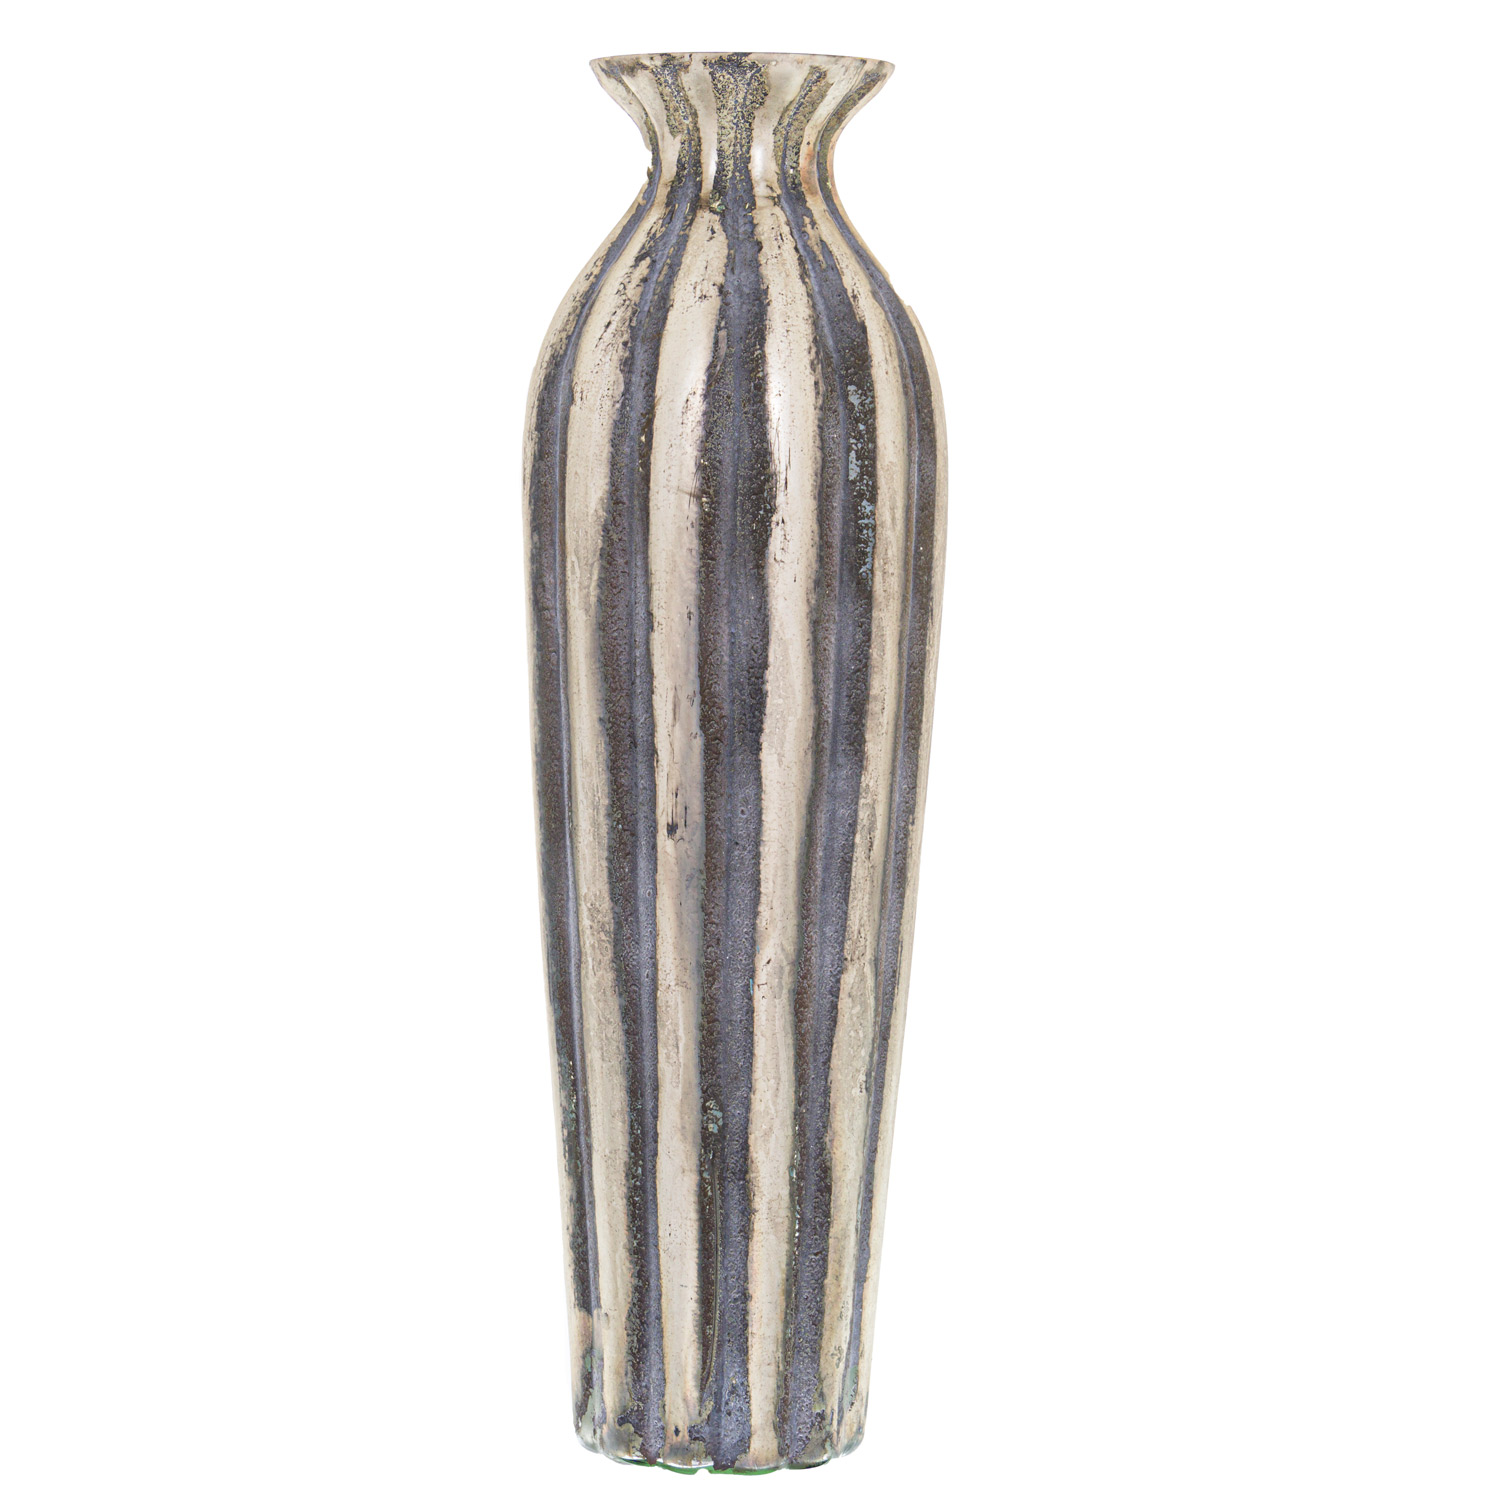 Burnished And Grey Striped Tall Vase - Image 1